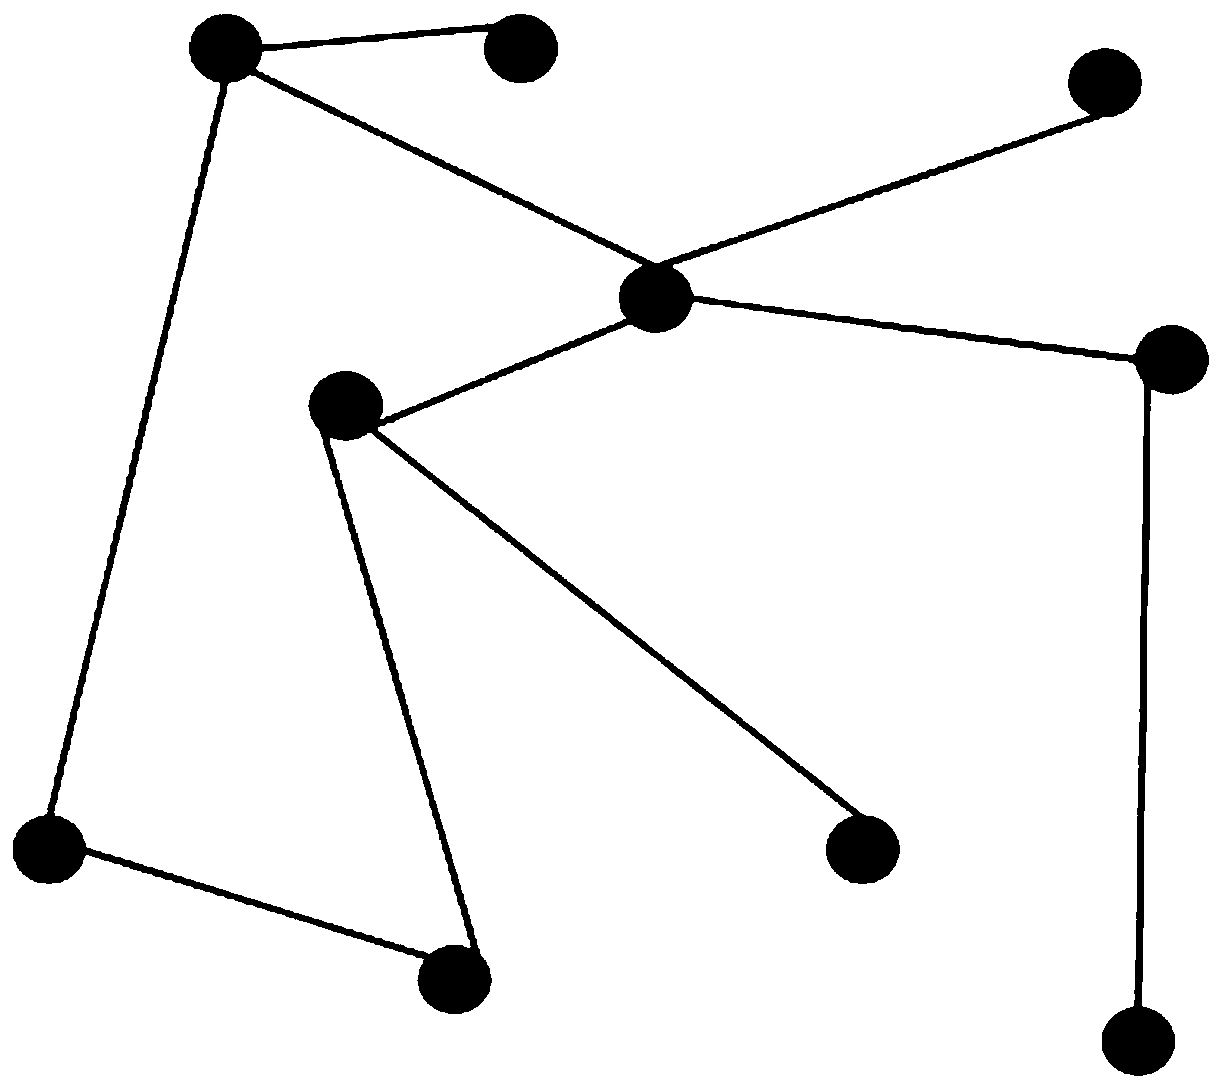 A parallel vehicle networking modeling method based on small world network theory